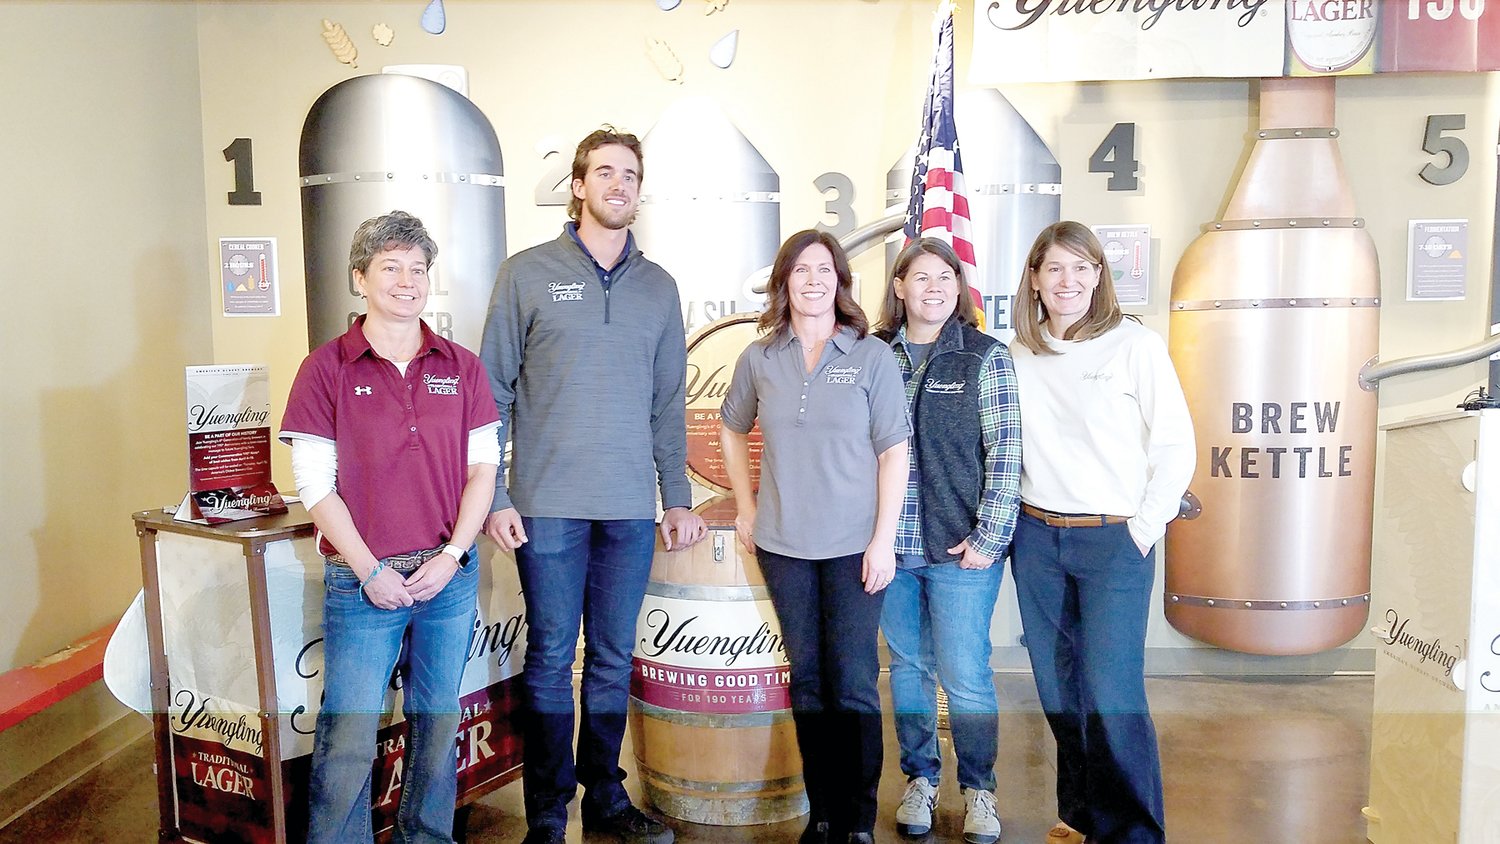 Yuengling’s sixth generation daughters welcomed Philadelphia Phillies Pitcher Aaron Nola as one of the first active Major League Baseball players as its newest brand ambassador at a media event held April 4 at the Pottsville-based brewery. From left are Jen Yuengling, Nola, Debbie, Sheryl and Wendy Yuengling.